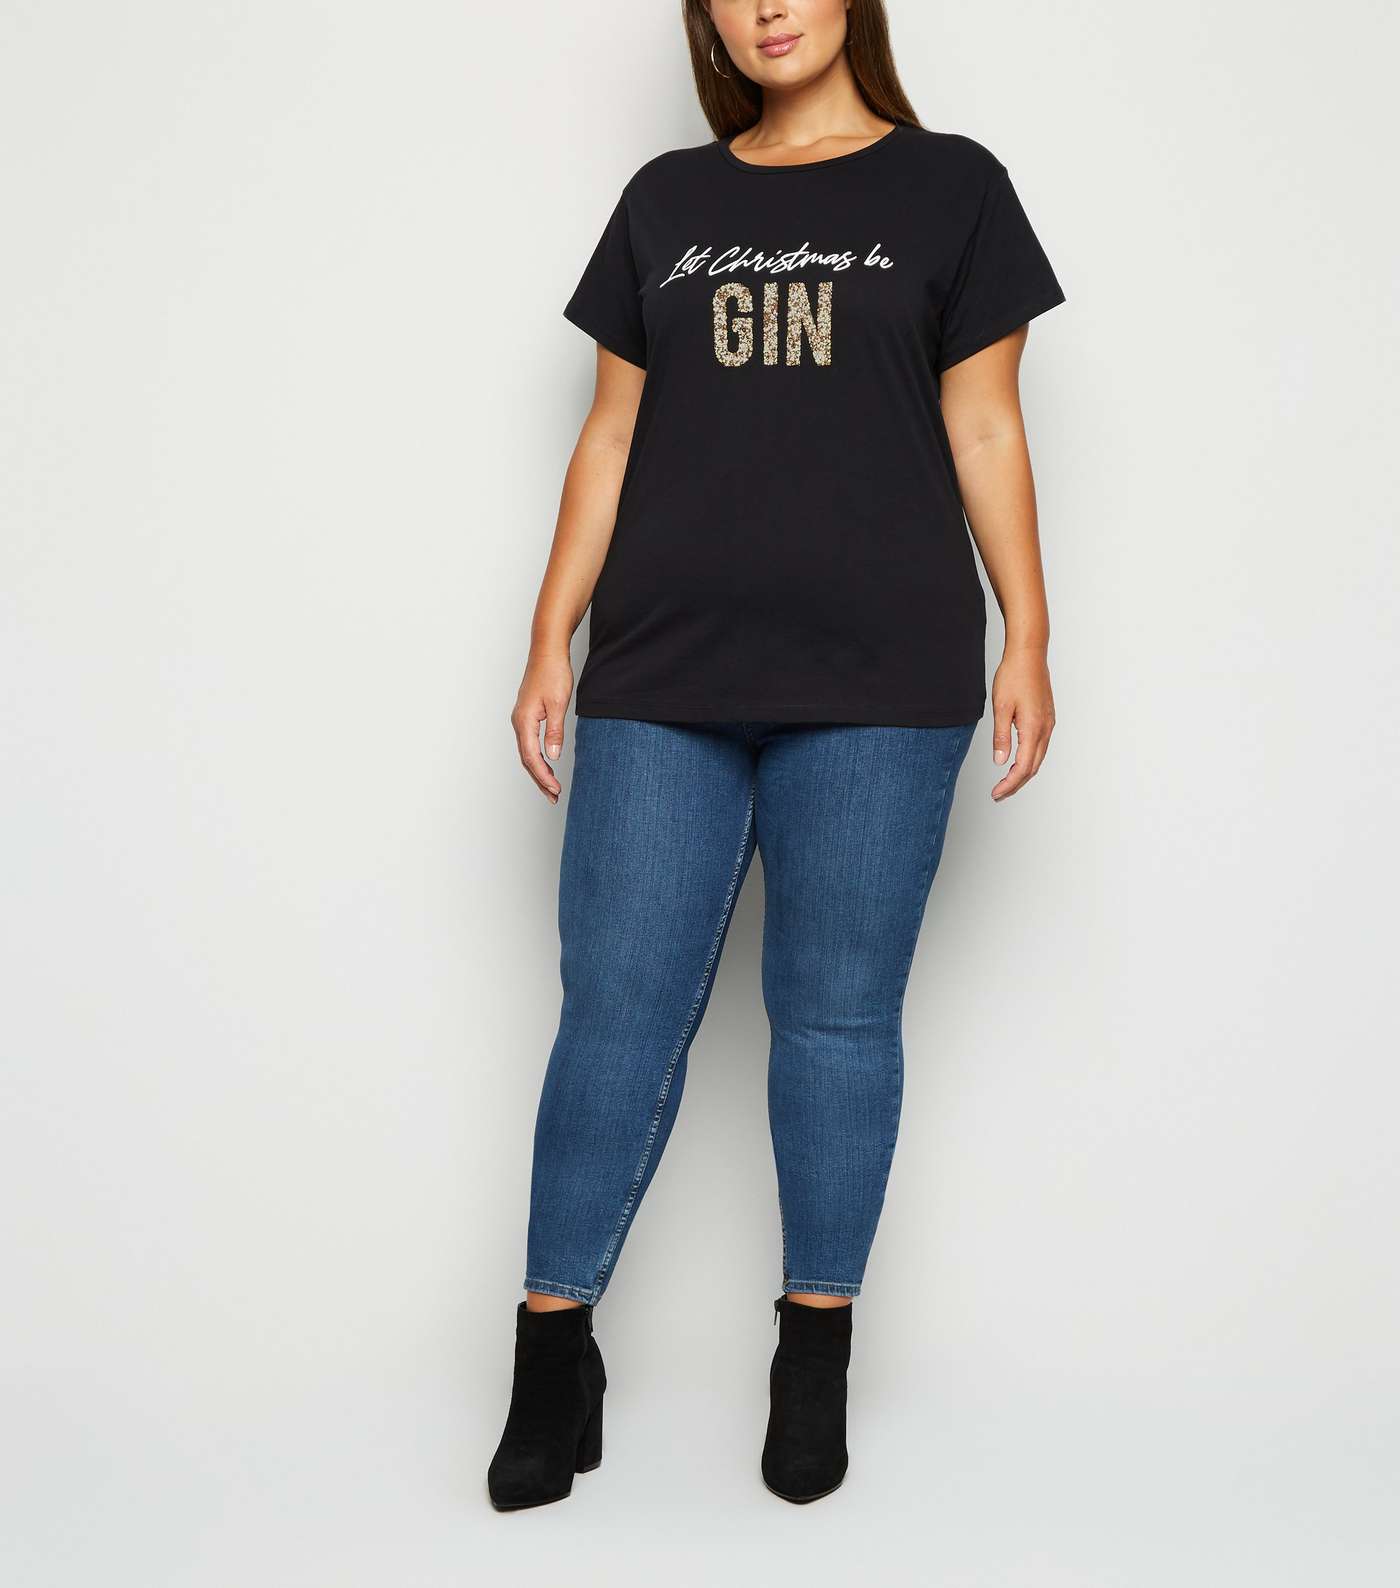 Curves Black Let Christmas Be Gin T-Shirt Image 2